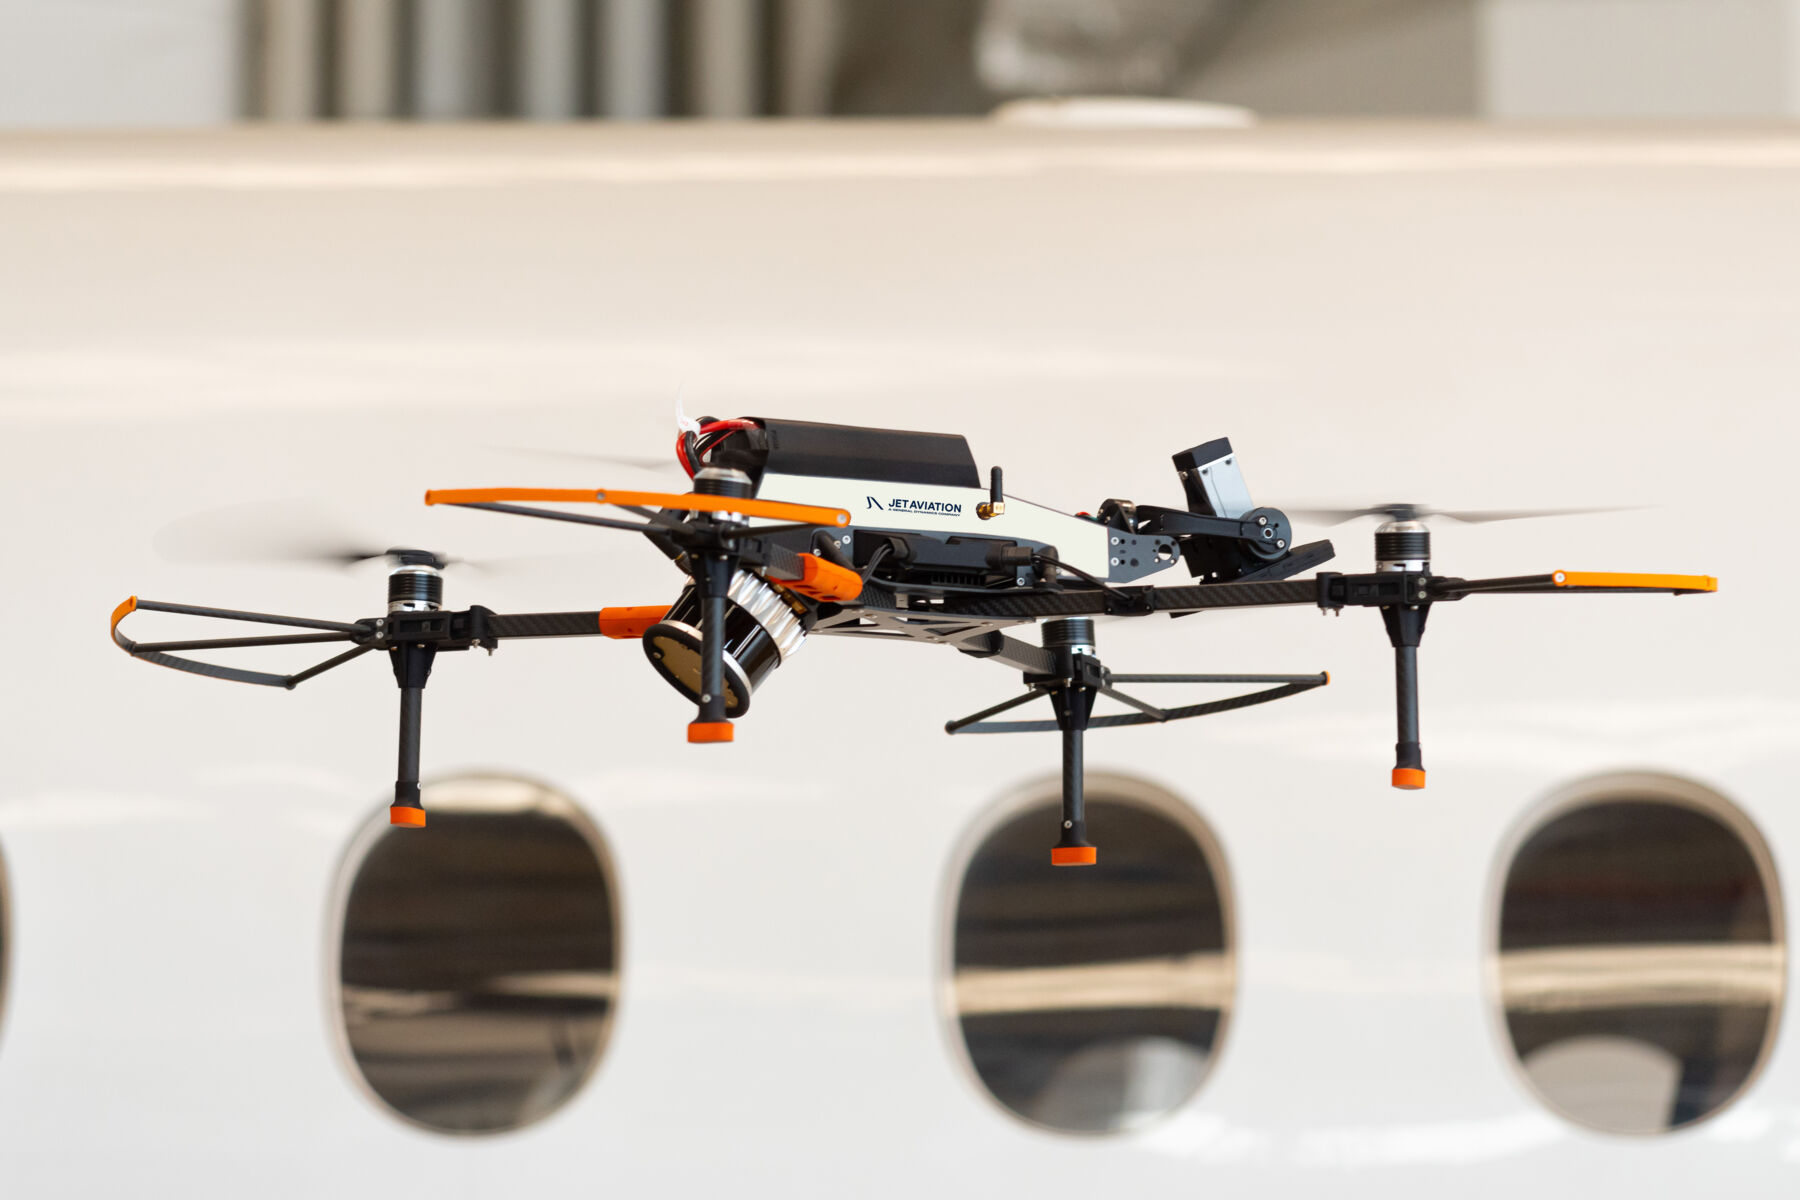 Jet Aviation Receives Approval from Swiss Civil Aviation Authority for Use of Automated Drone in Regulated Inspections by Images